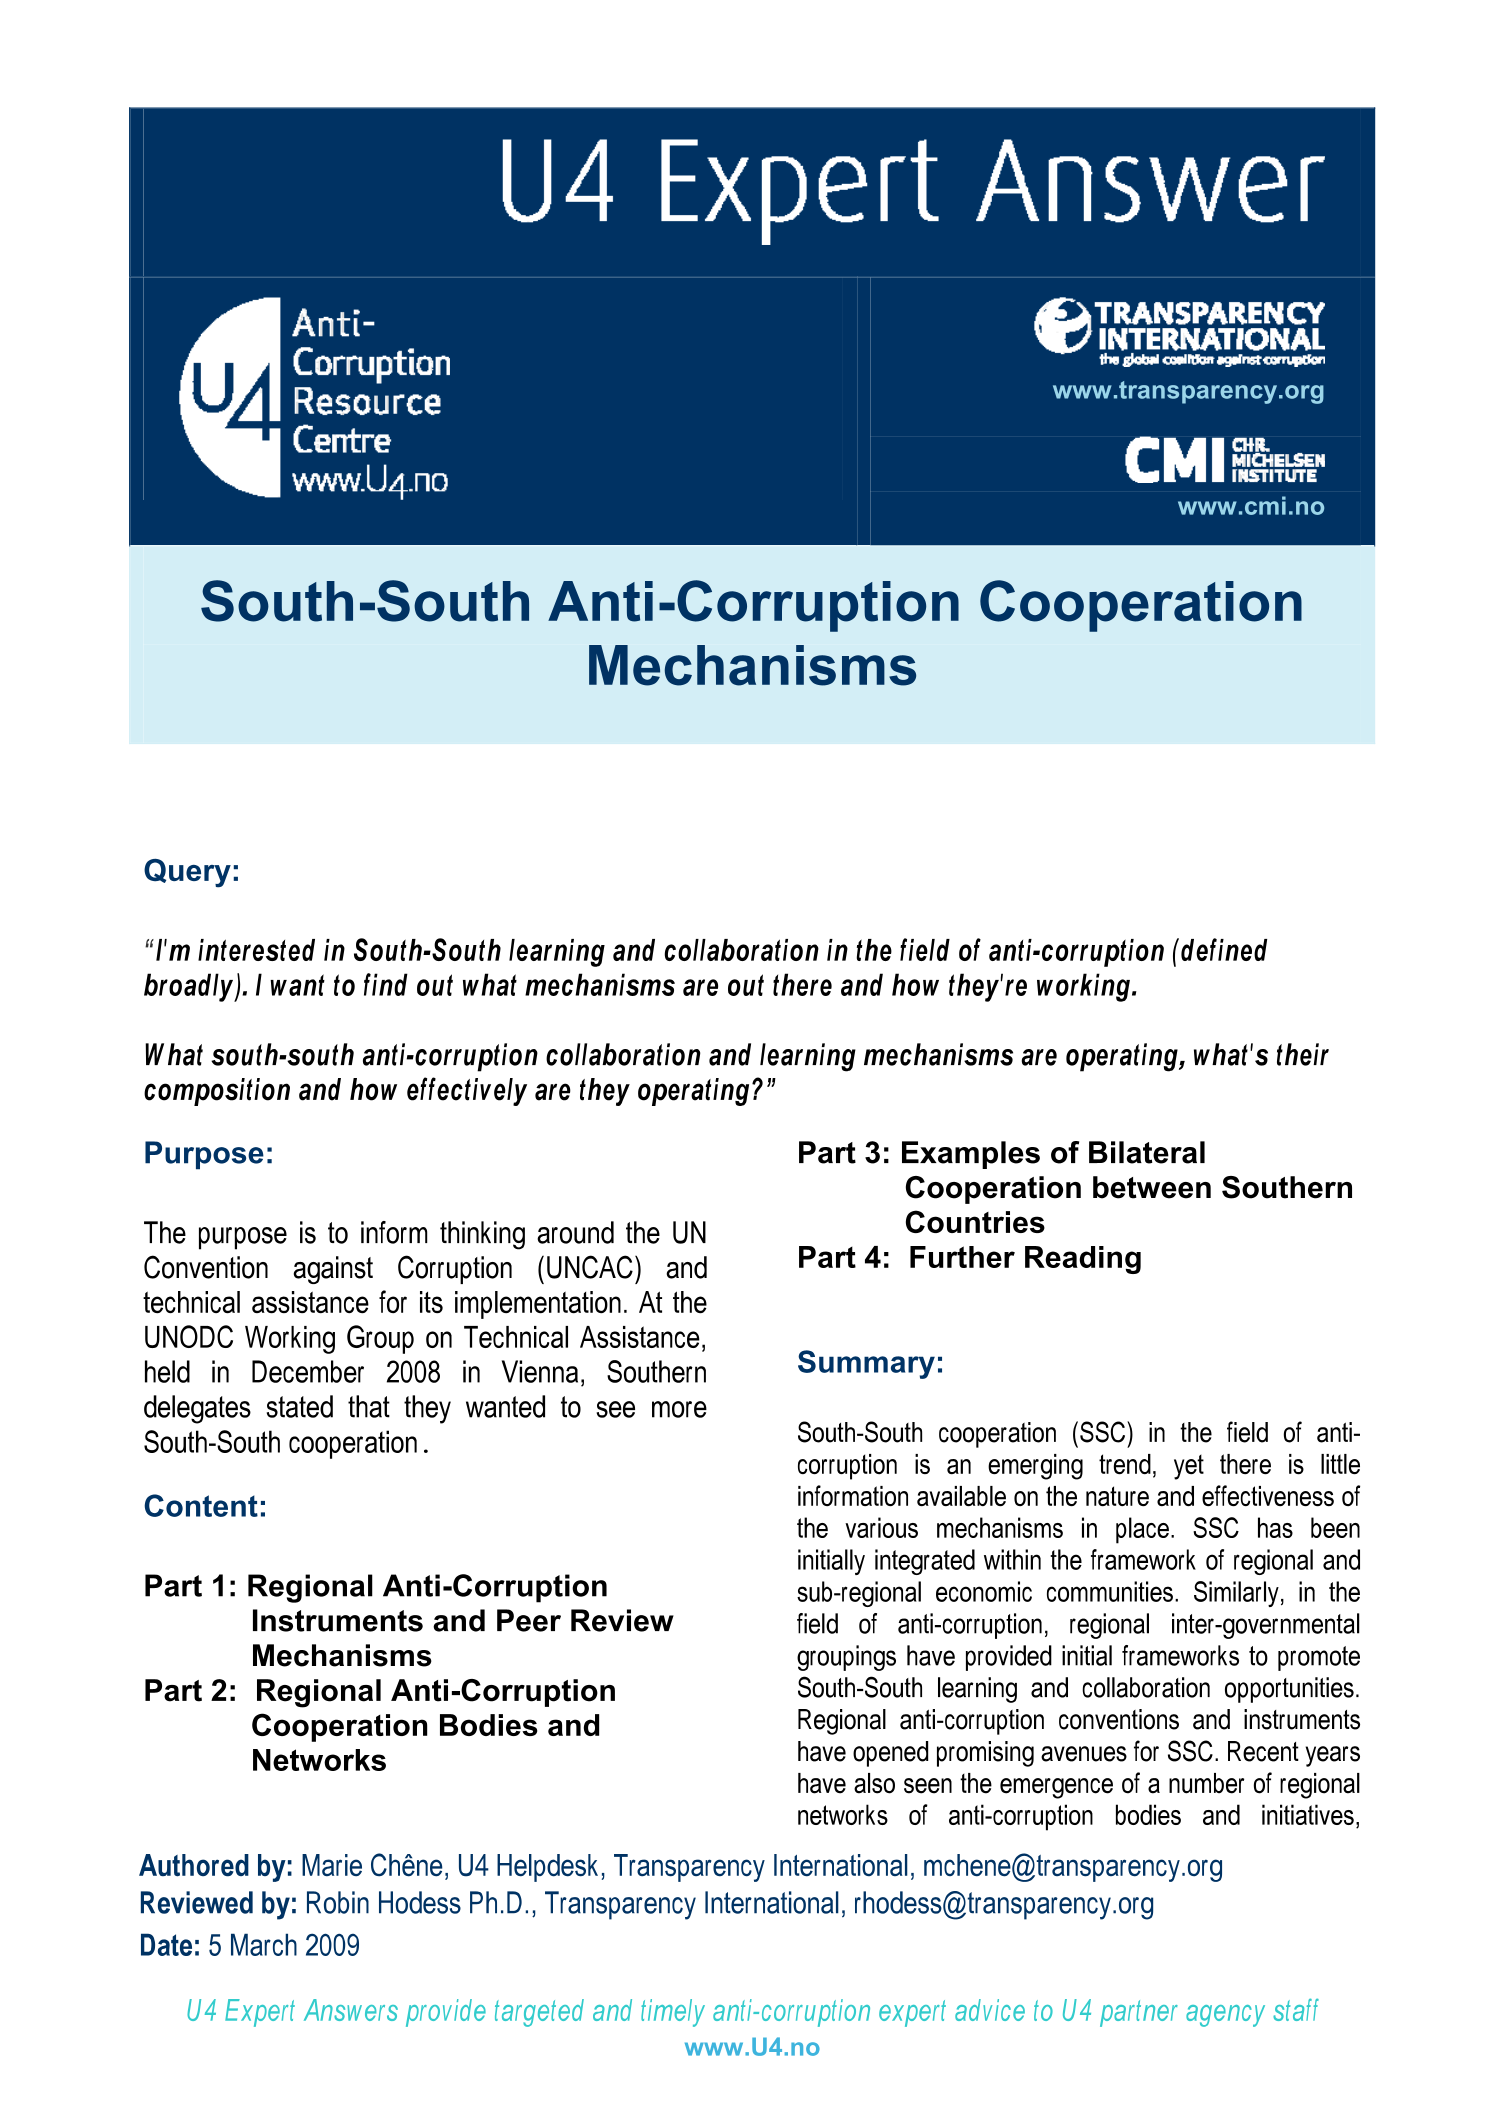 South-south anti-corruption cooperation mechanisms